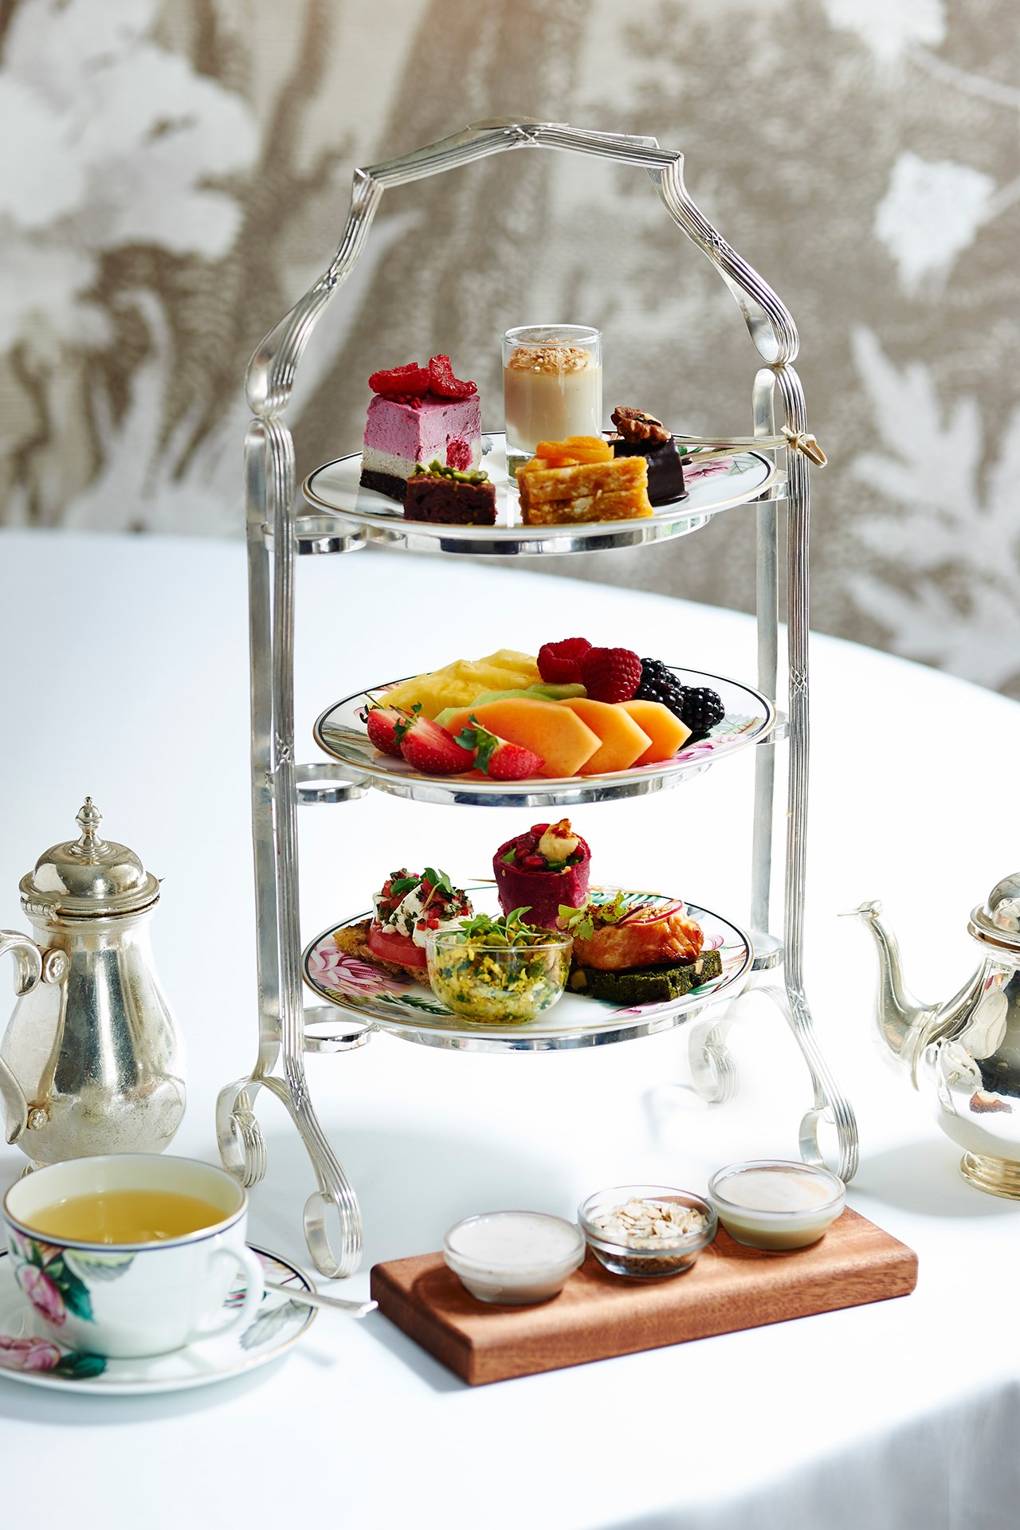 The Best Afternoon Tea In London For Tatler